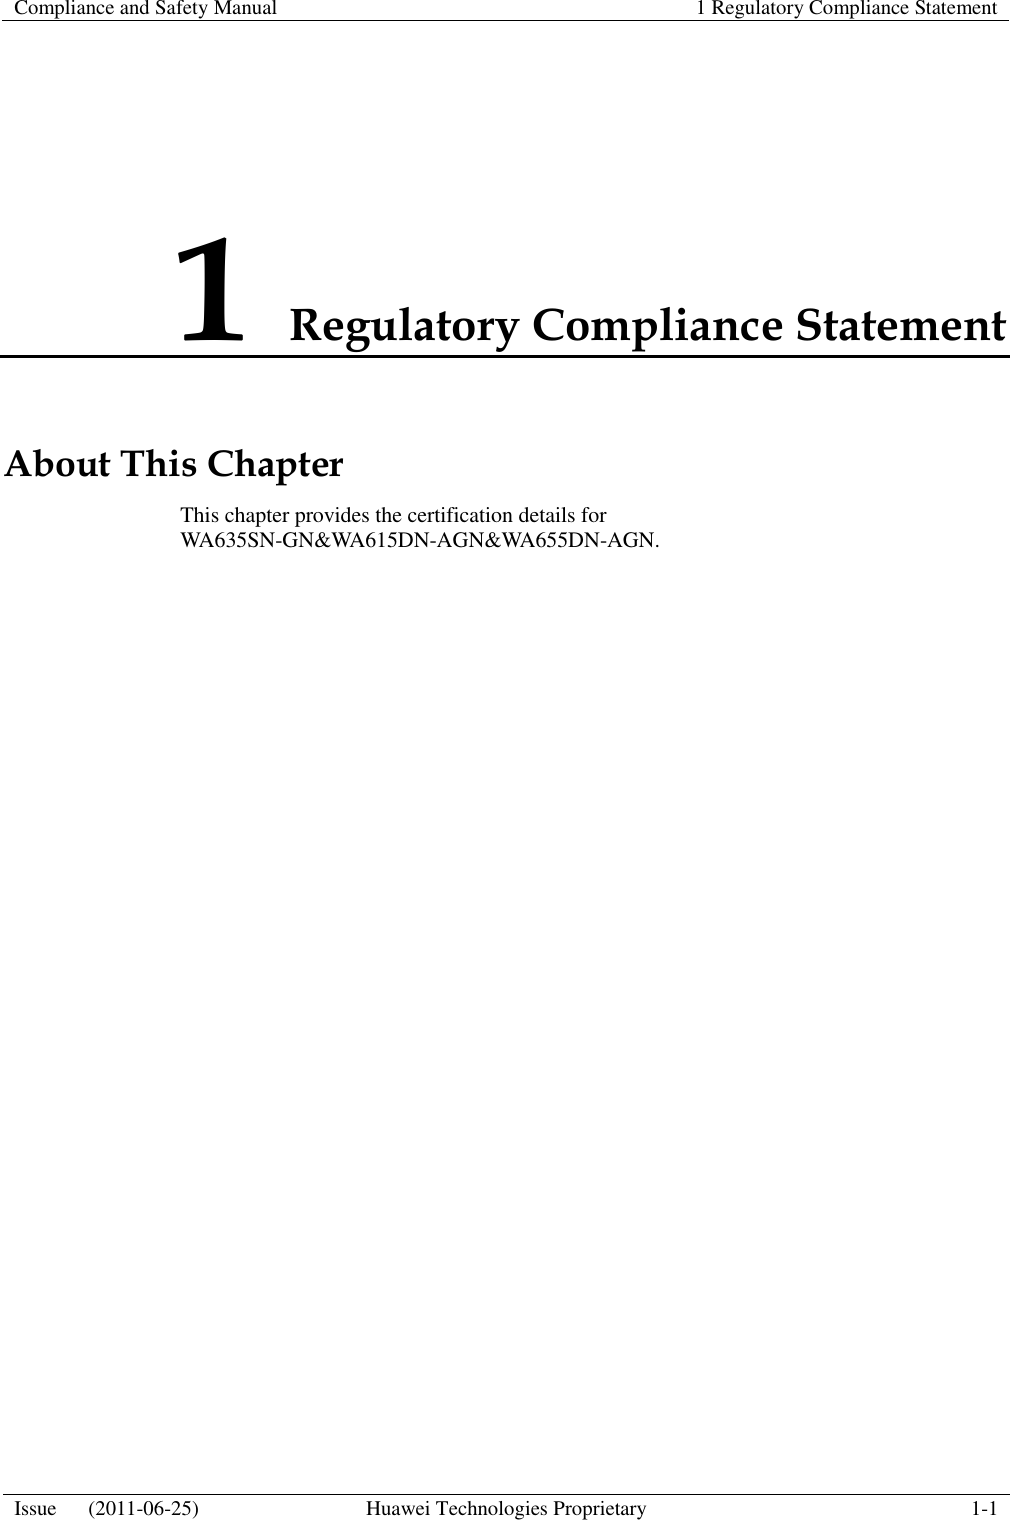    Compliance and Safety Manual 1 Regulatory Compliance Statement  Issue      (2011-06-25) Huawei Technologies Proprietary 1-1  1 Regulatory Compliance Statement About This Chapter This chapter provides the certification details for WA635SN-GN&amp;WA615DN-AGN&amp;WA655DN-AGN. 